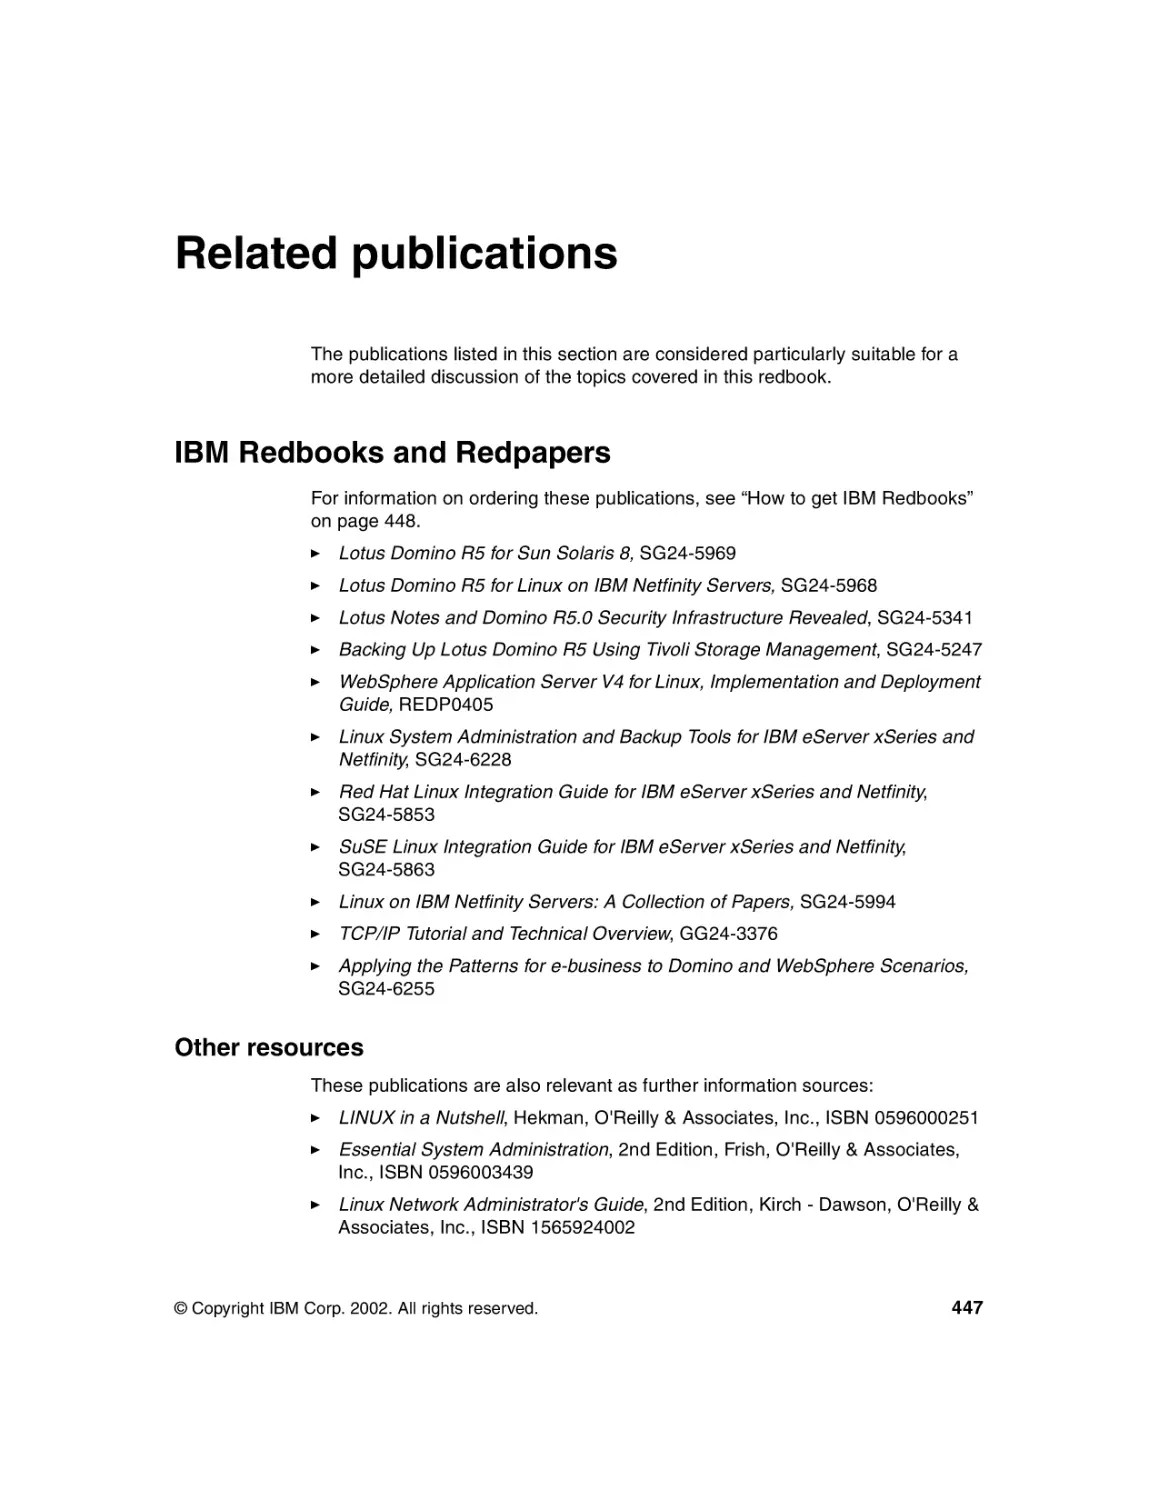 Related publications
IBM Redbooks and Redpapers
Other resources